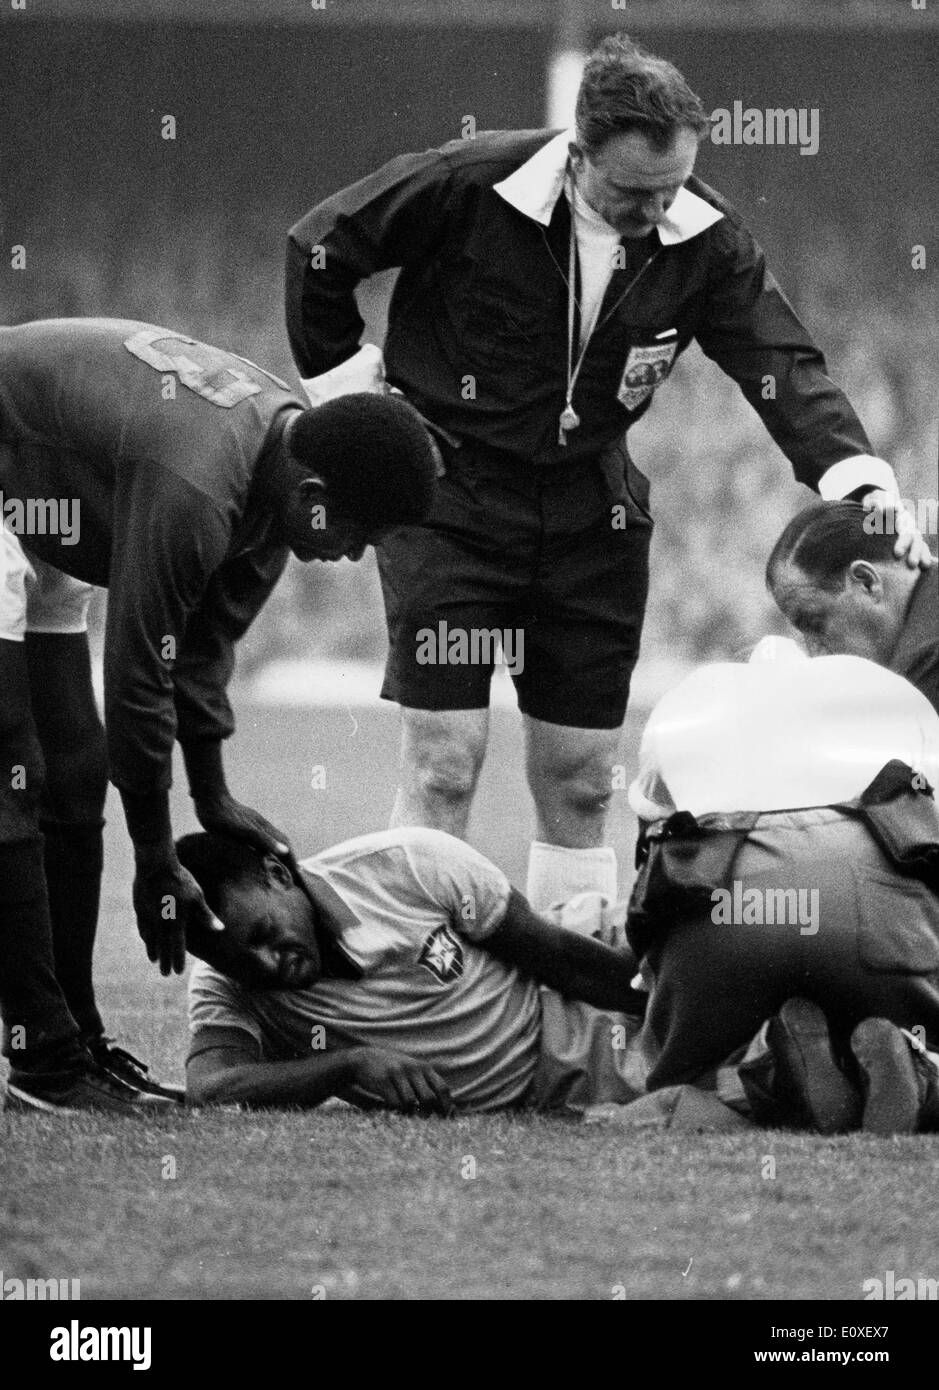 Soccer player Pele after being injured during a World Cup Match Stock Photo